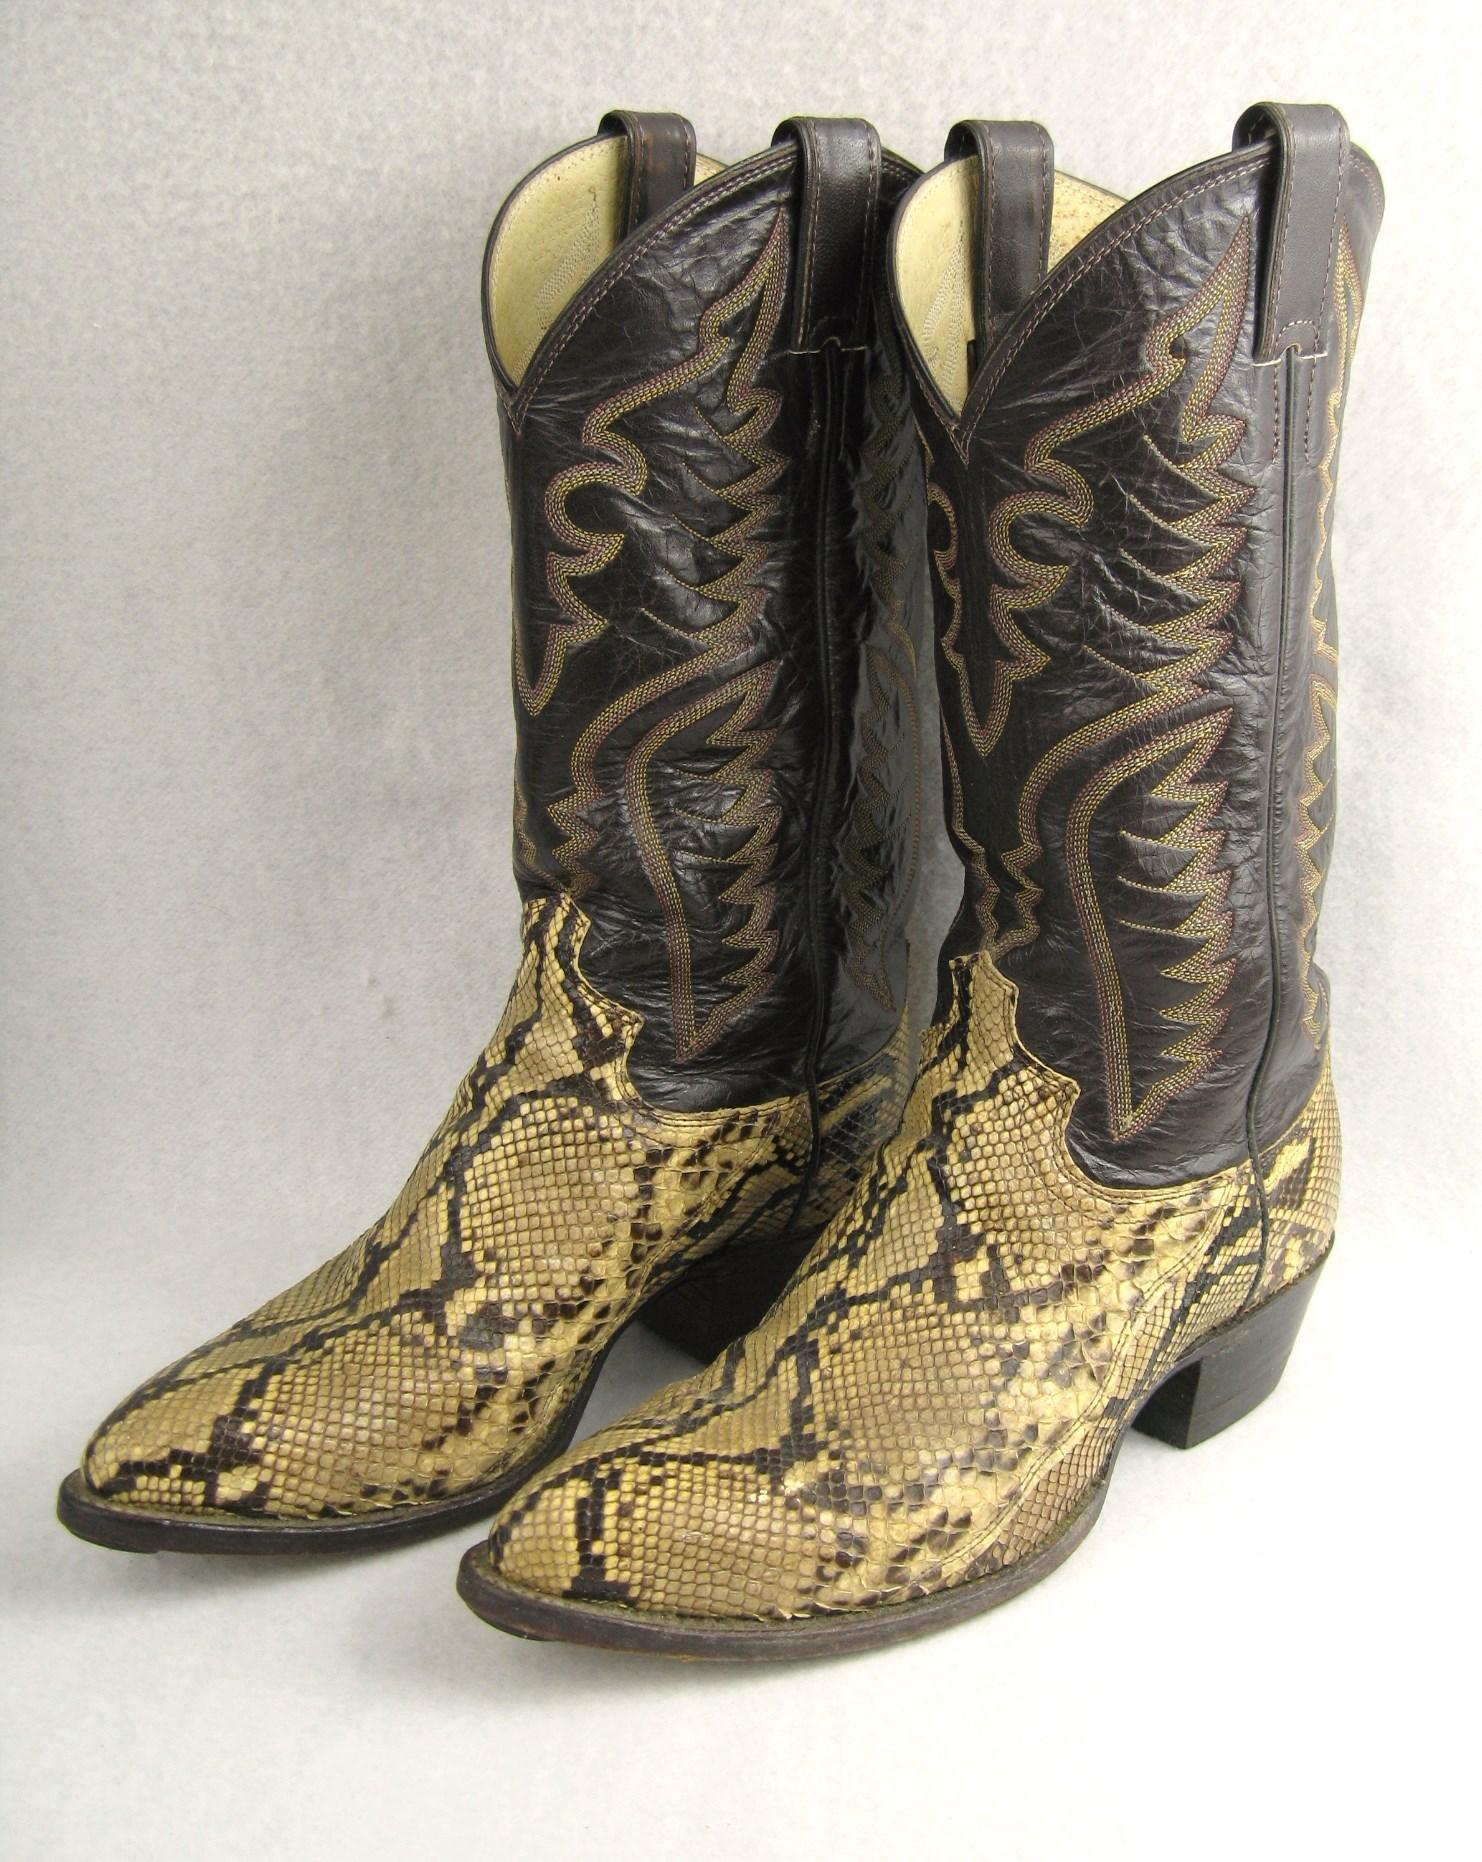 Pair of Vintage Justin Snake Skin Cowboy boots. Size 8.5 E Style 8621 - Women size 9.5-10 this will fit a medium width foot. Please be sure to check our storefront for more fashion as we have both Vintage and Contemporary fashions. ready to wear! We